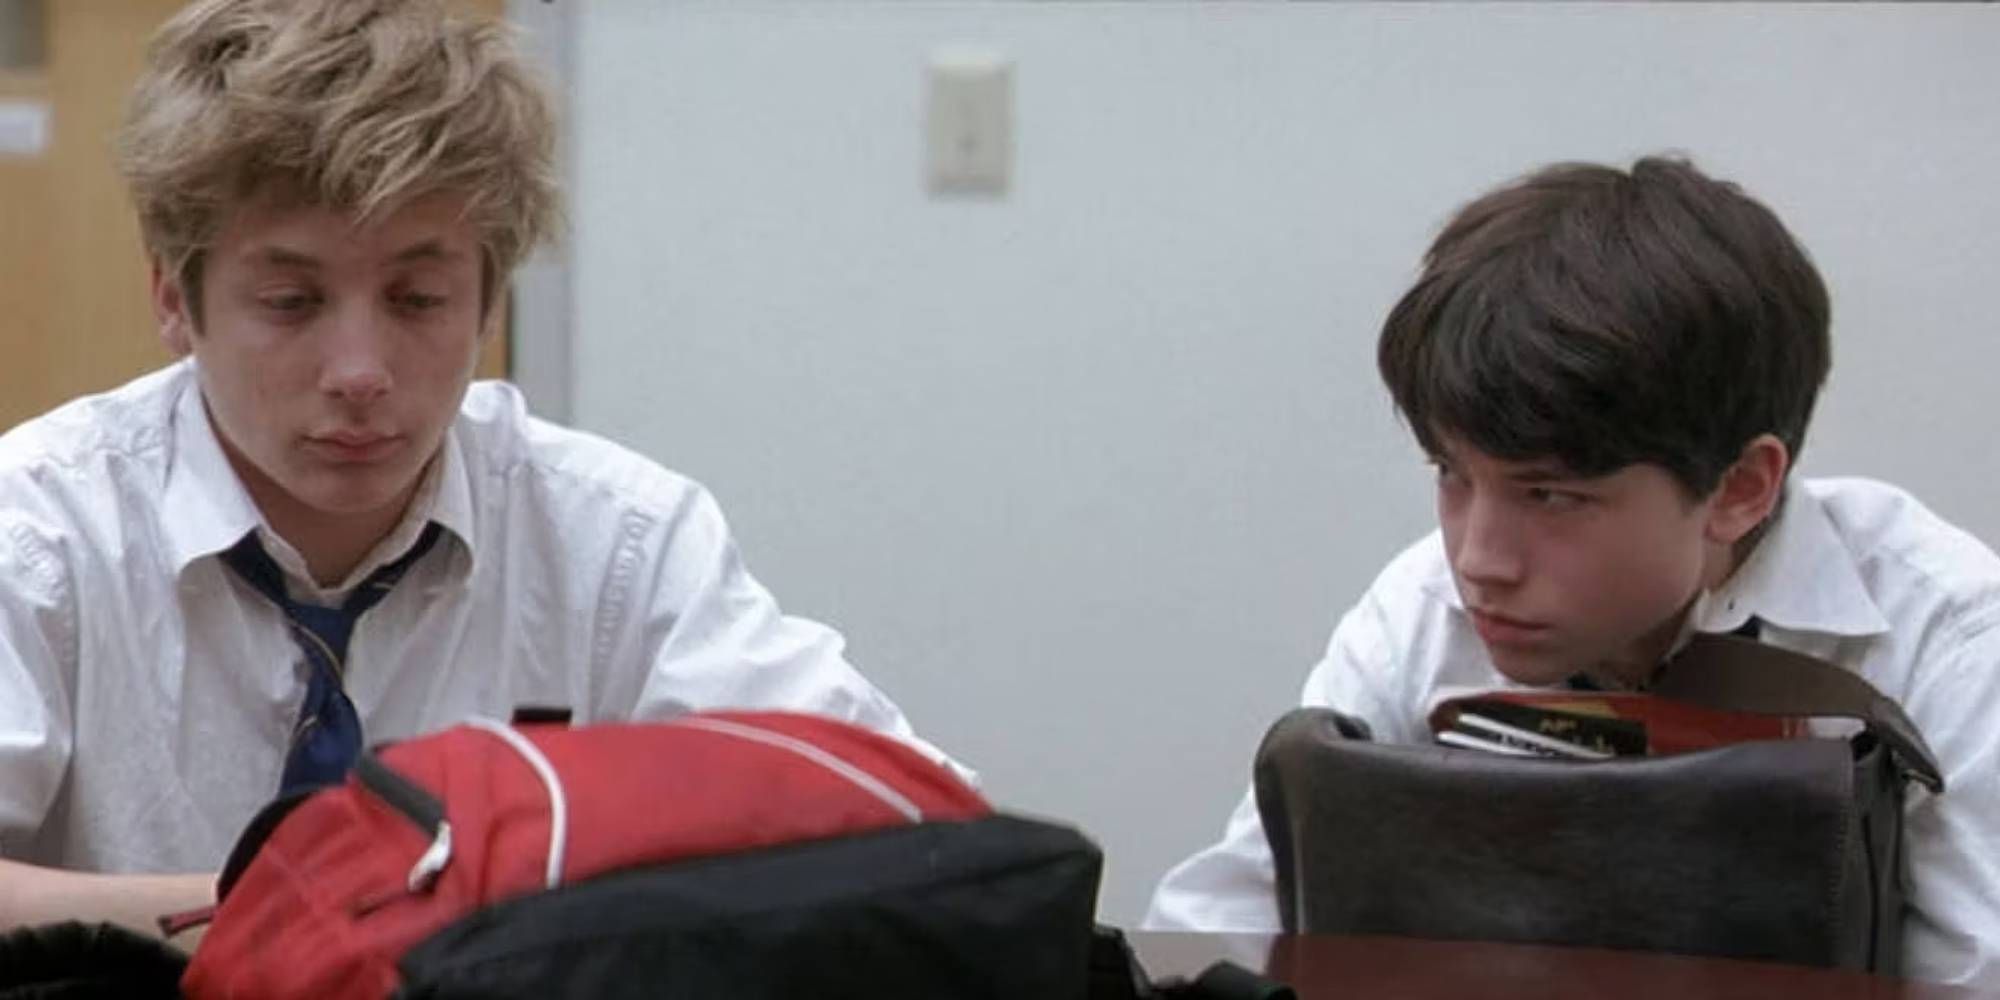 Jeremy Allen White and Ezra Miller looking bored in class in Afterschool